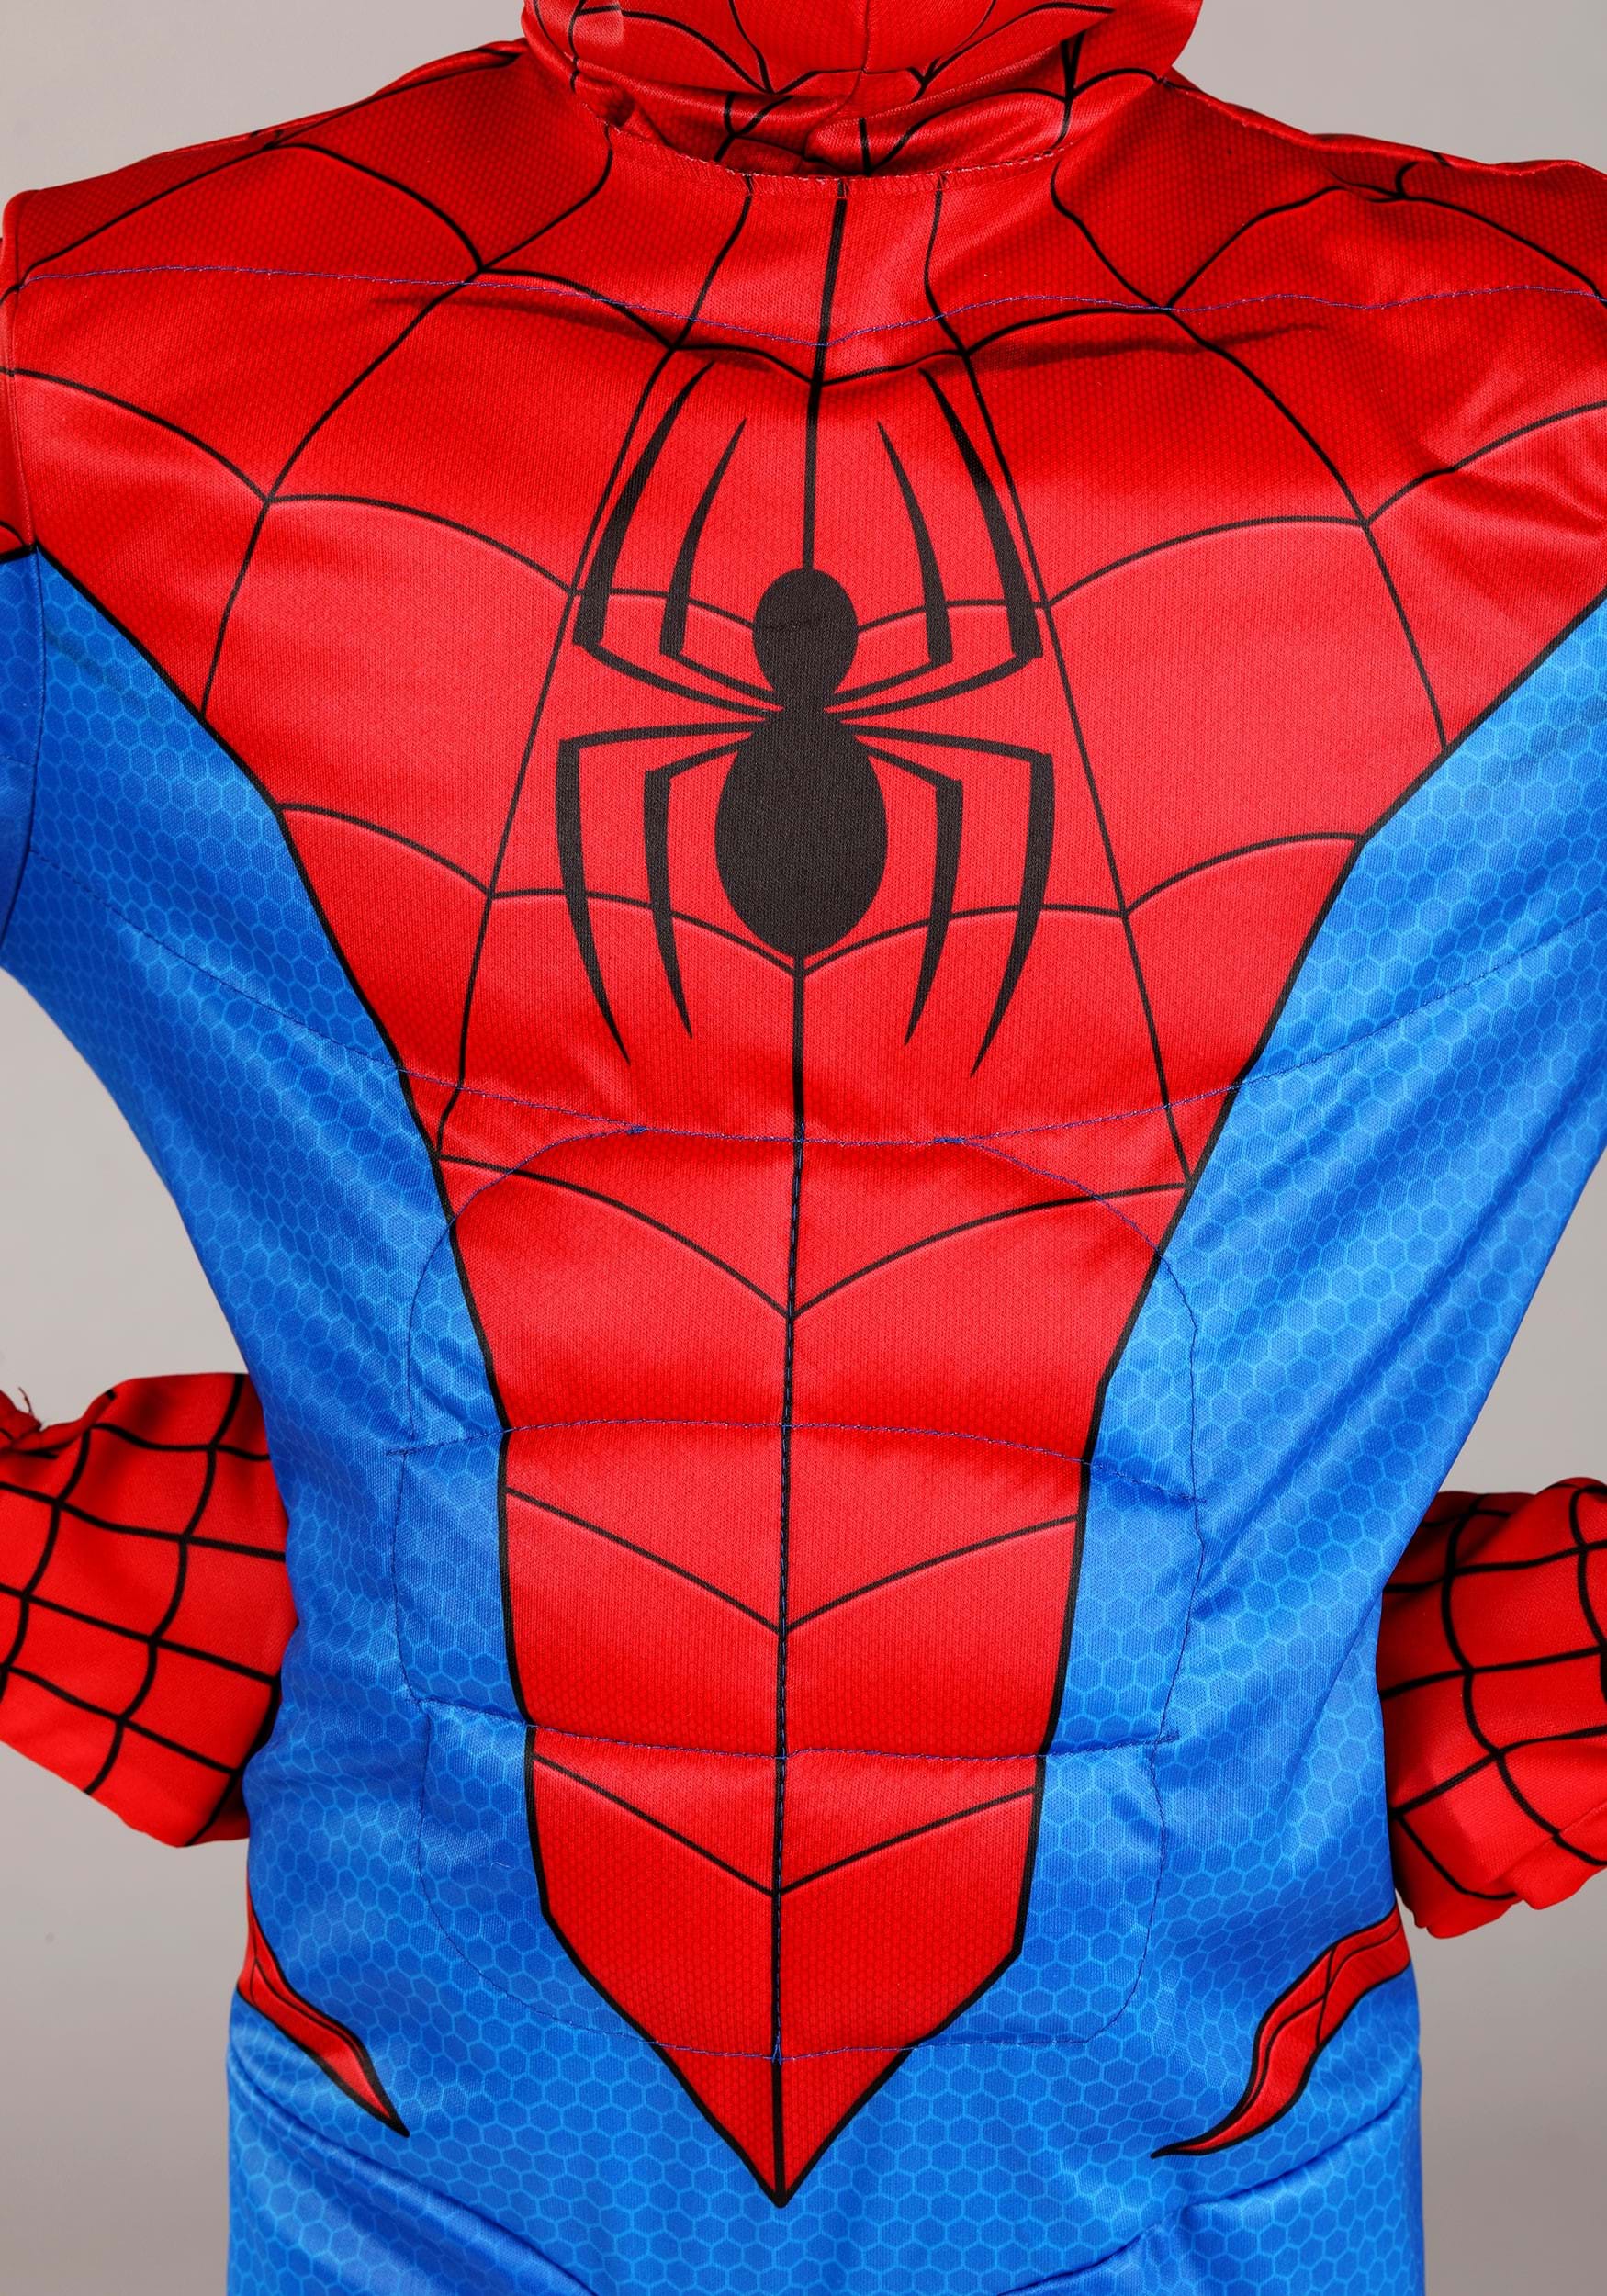 Classic Spider-Man Costume Superhero for Kids Boys Toddlers